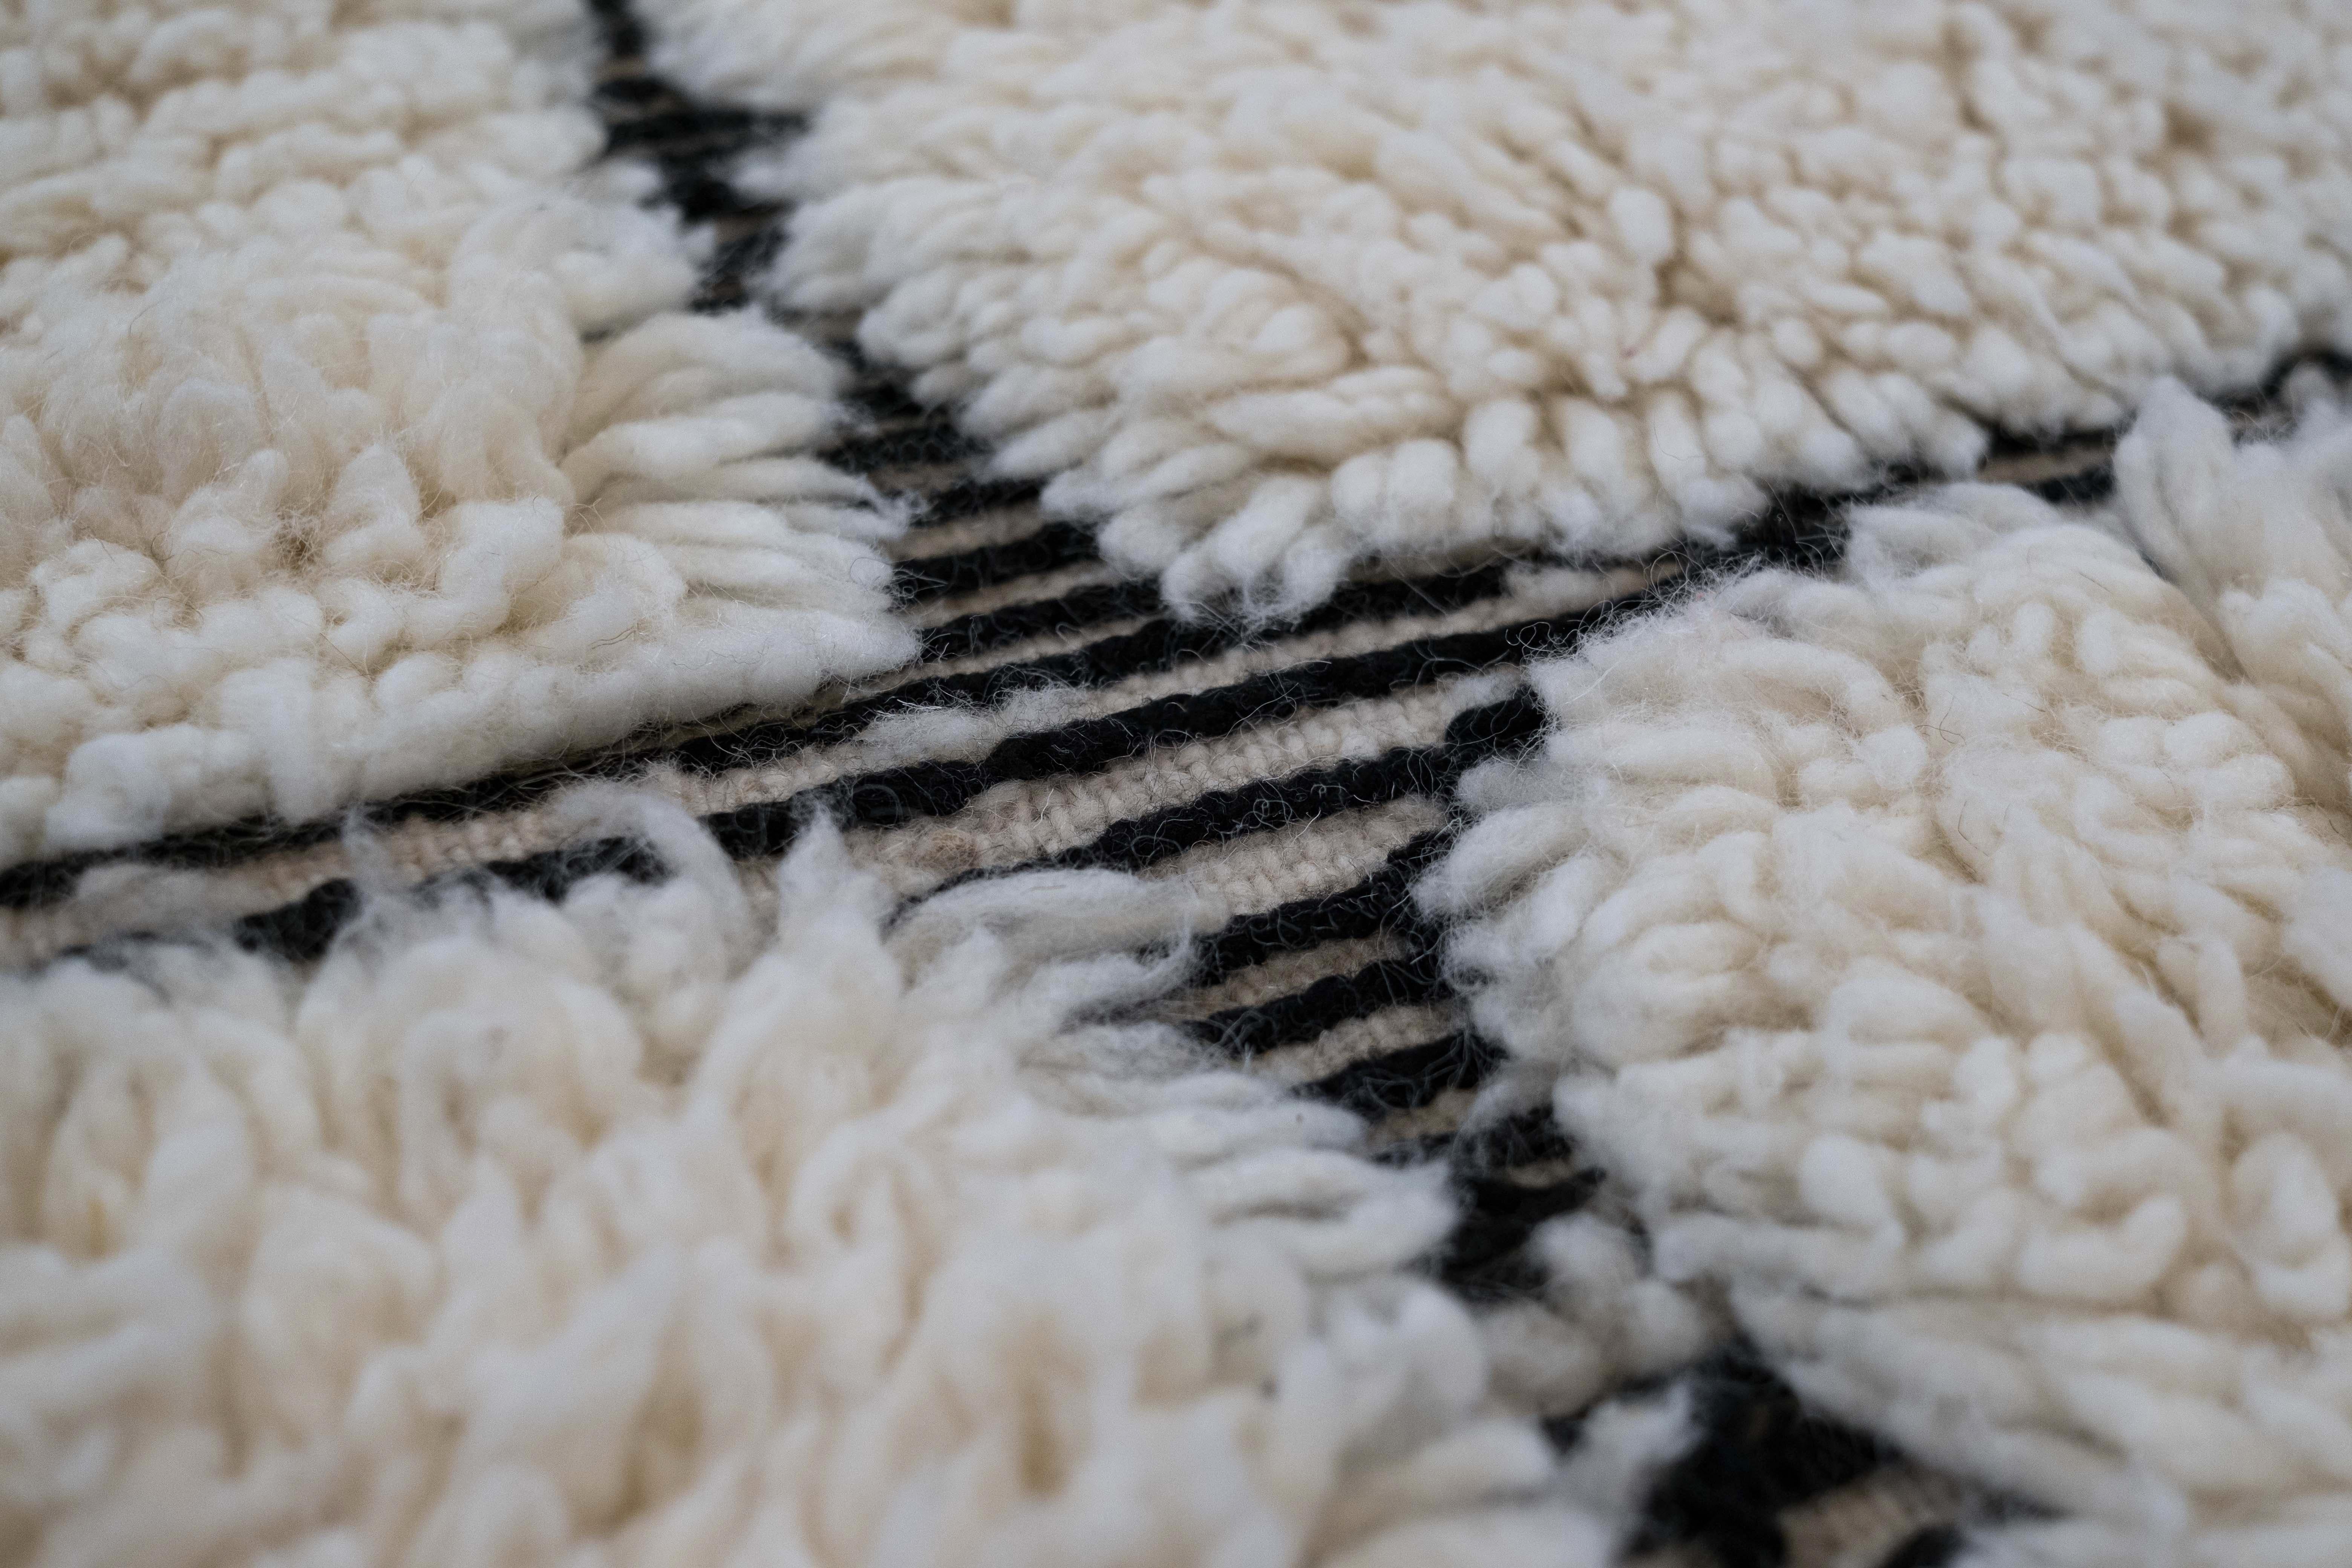 Manufactured from 100% wool, the yarn is not dyed, leaving the tone of black color only to the thread used to enrich the rug with the typical symbolism of nomadic tribes. The softness of the untreated wool has made it the best solution for sleeping